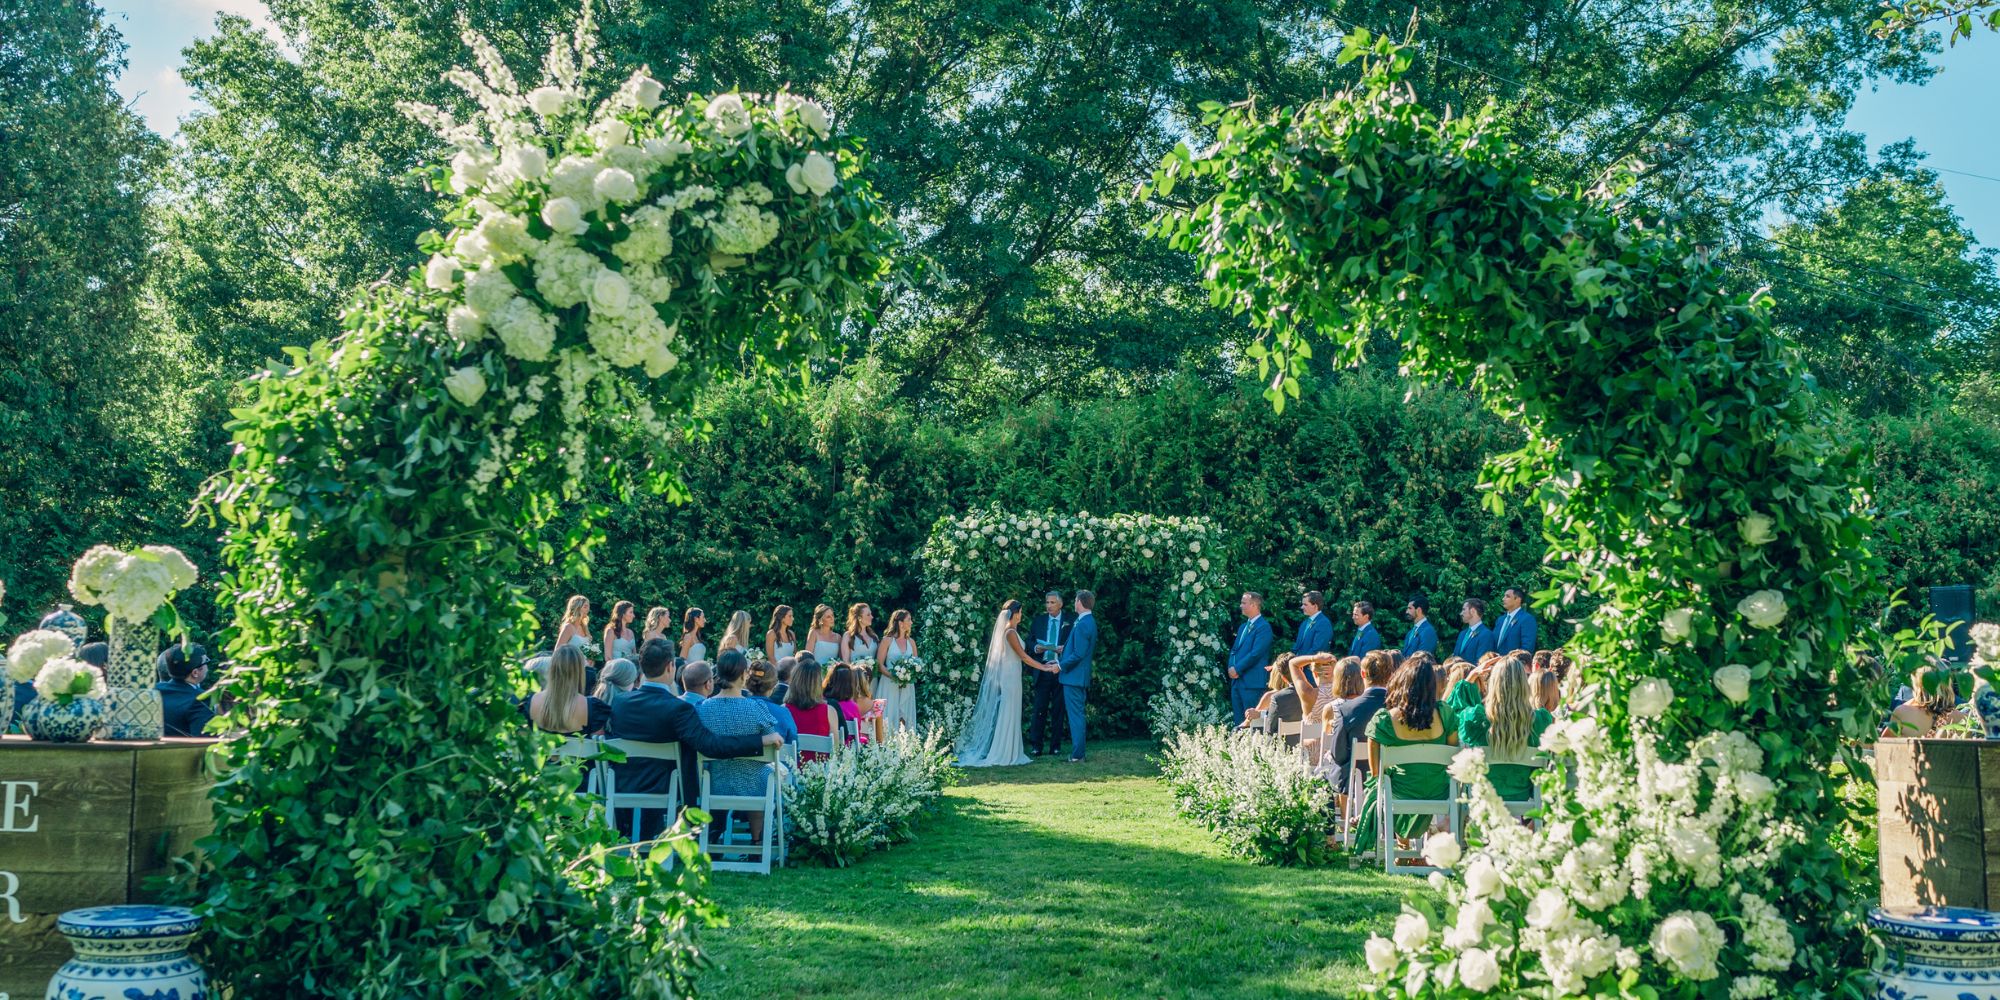 Wedding ceremony in the Orchard Garden at Basin Harbor